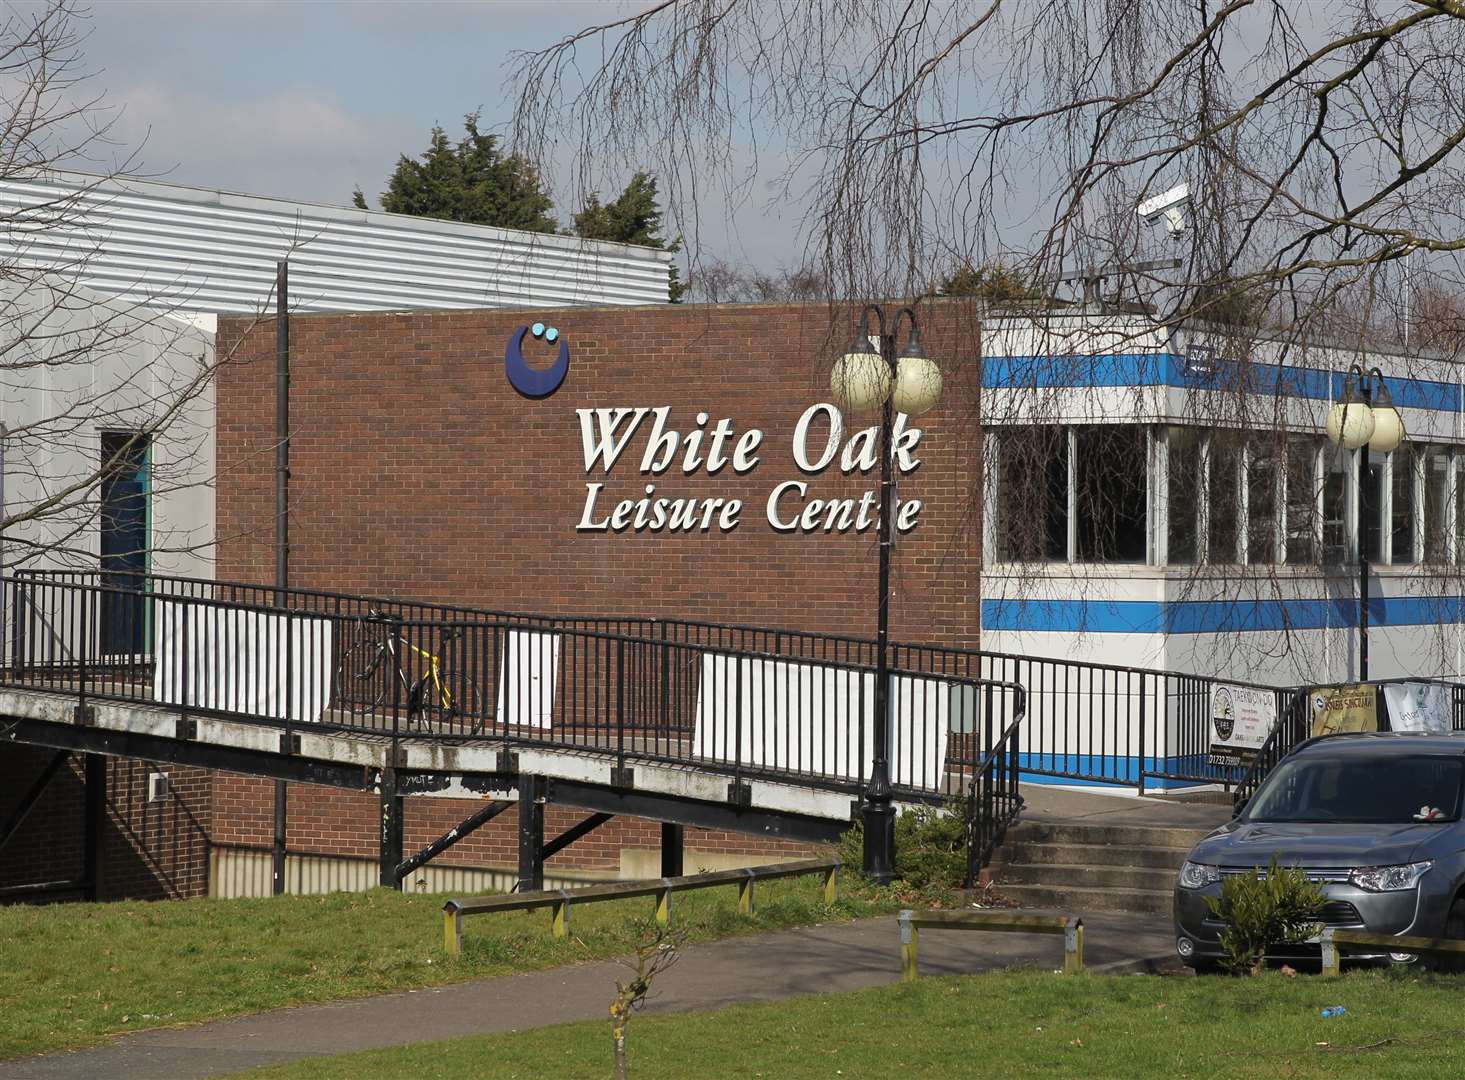 The former White Oak Leisure Centre in Swanley, which is being replaced. Picture: John Westhrop